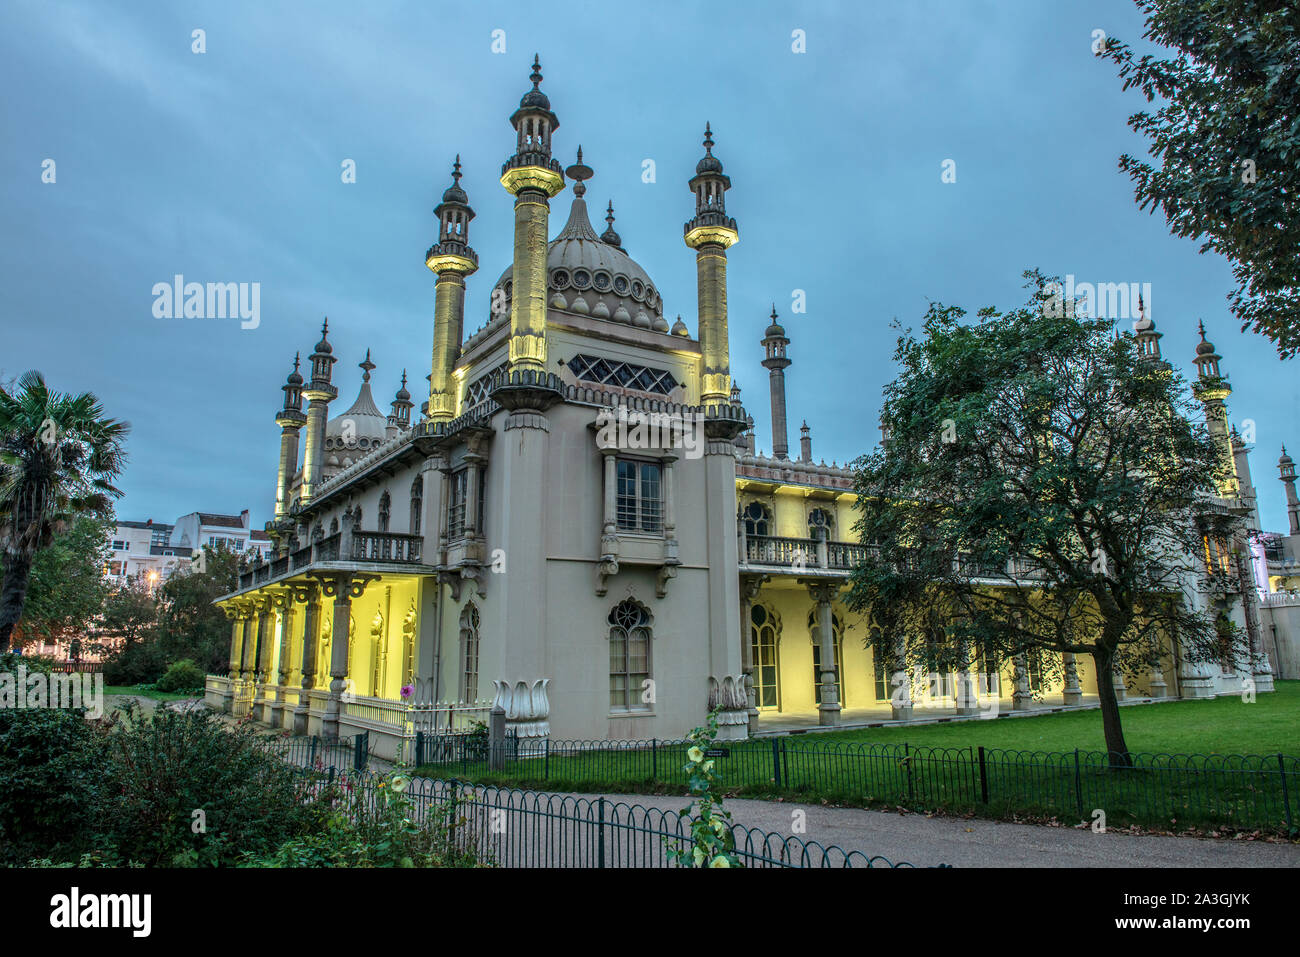 Royal Pavillion in Brighton, East Sussex, England. Stock Photo